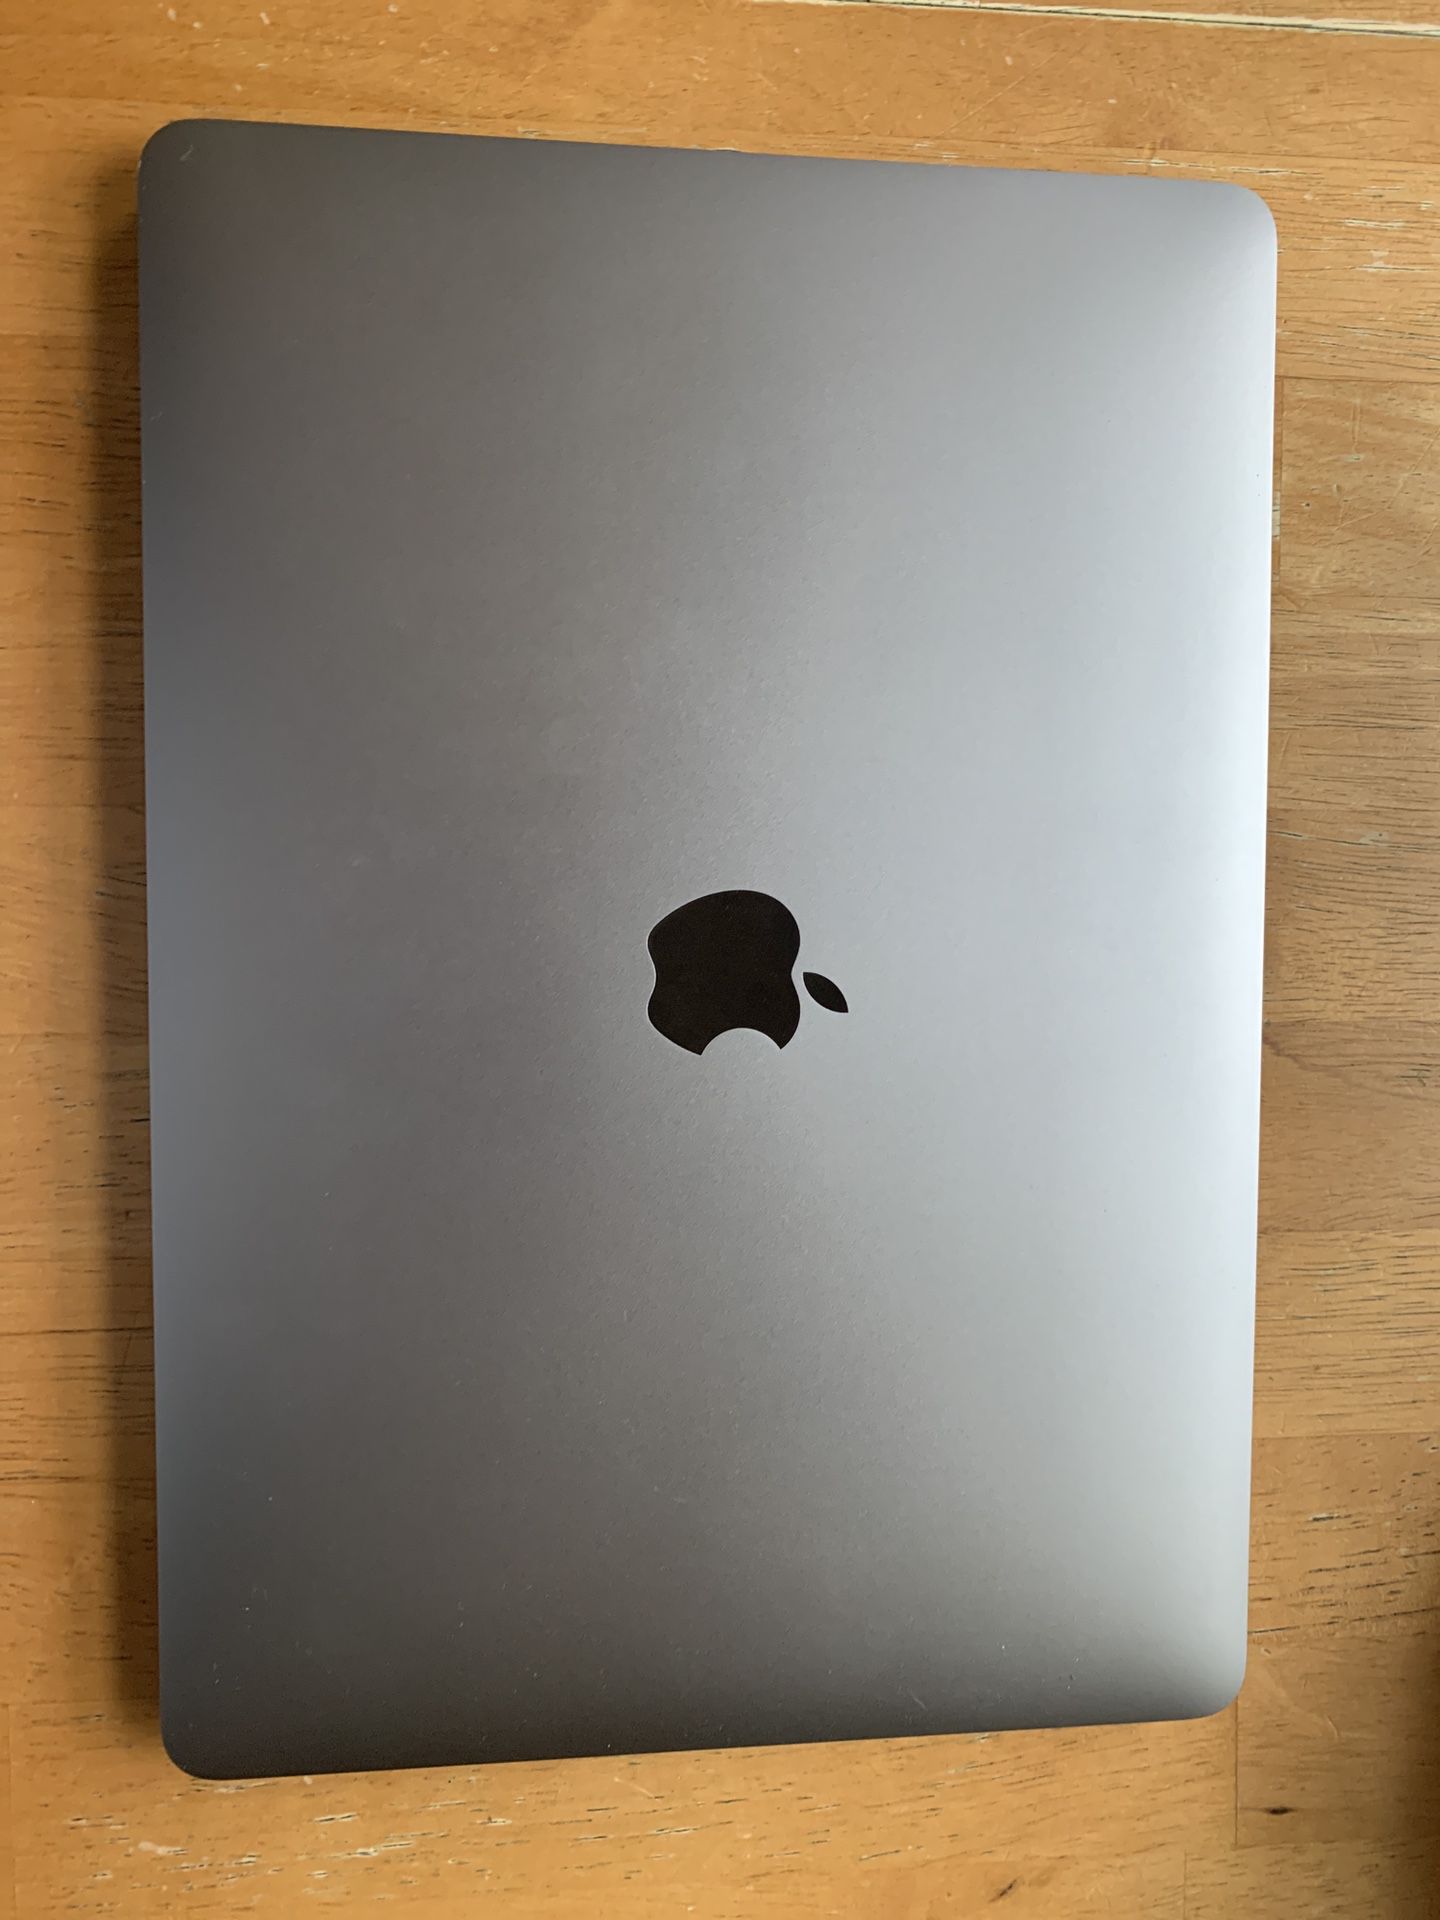 2018 MacBook Air i5 w/ adapters (Price negotiable)